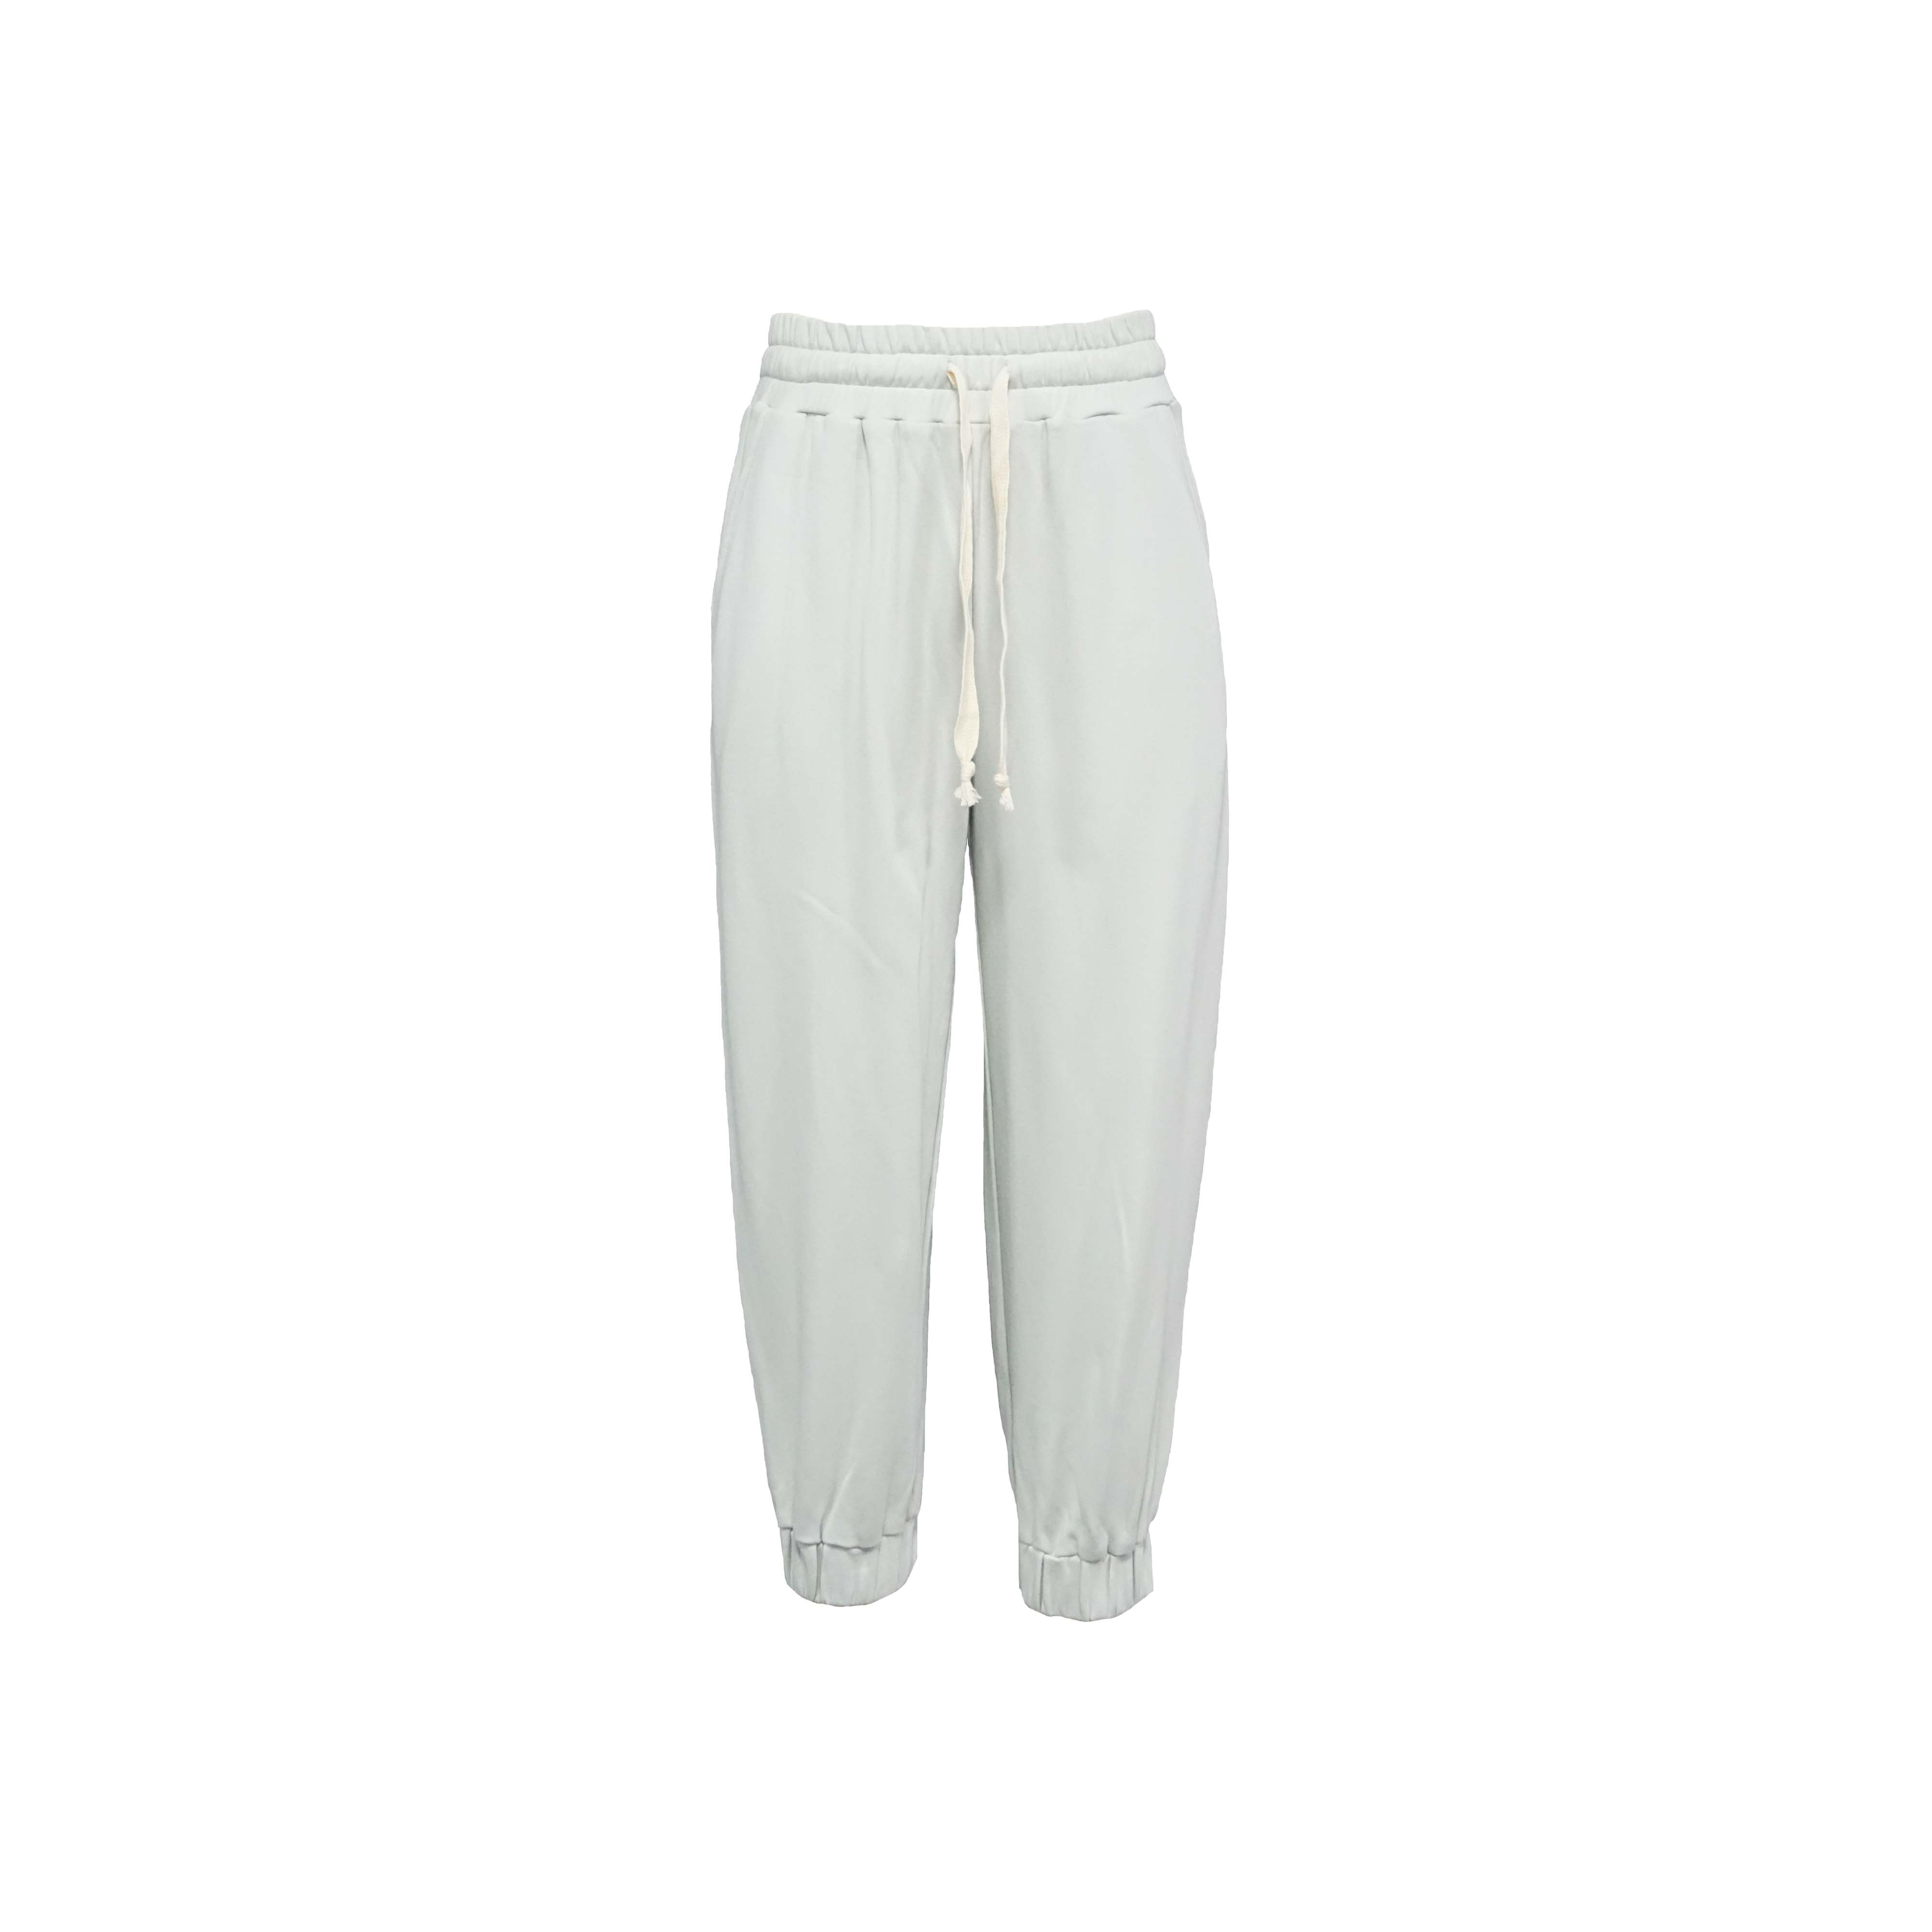 Mint green comfortable casual sports pants